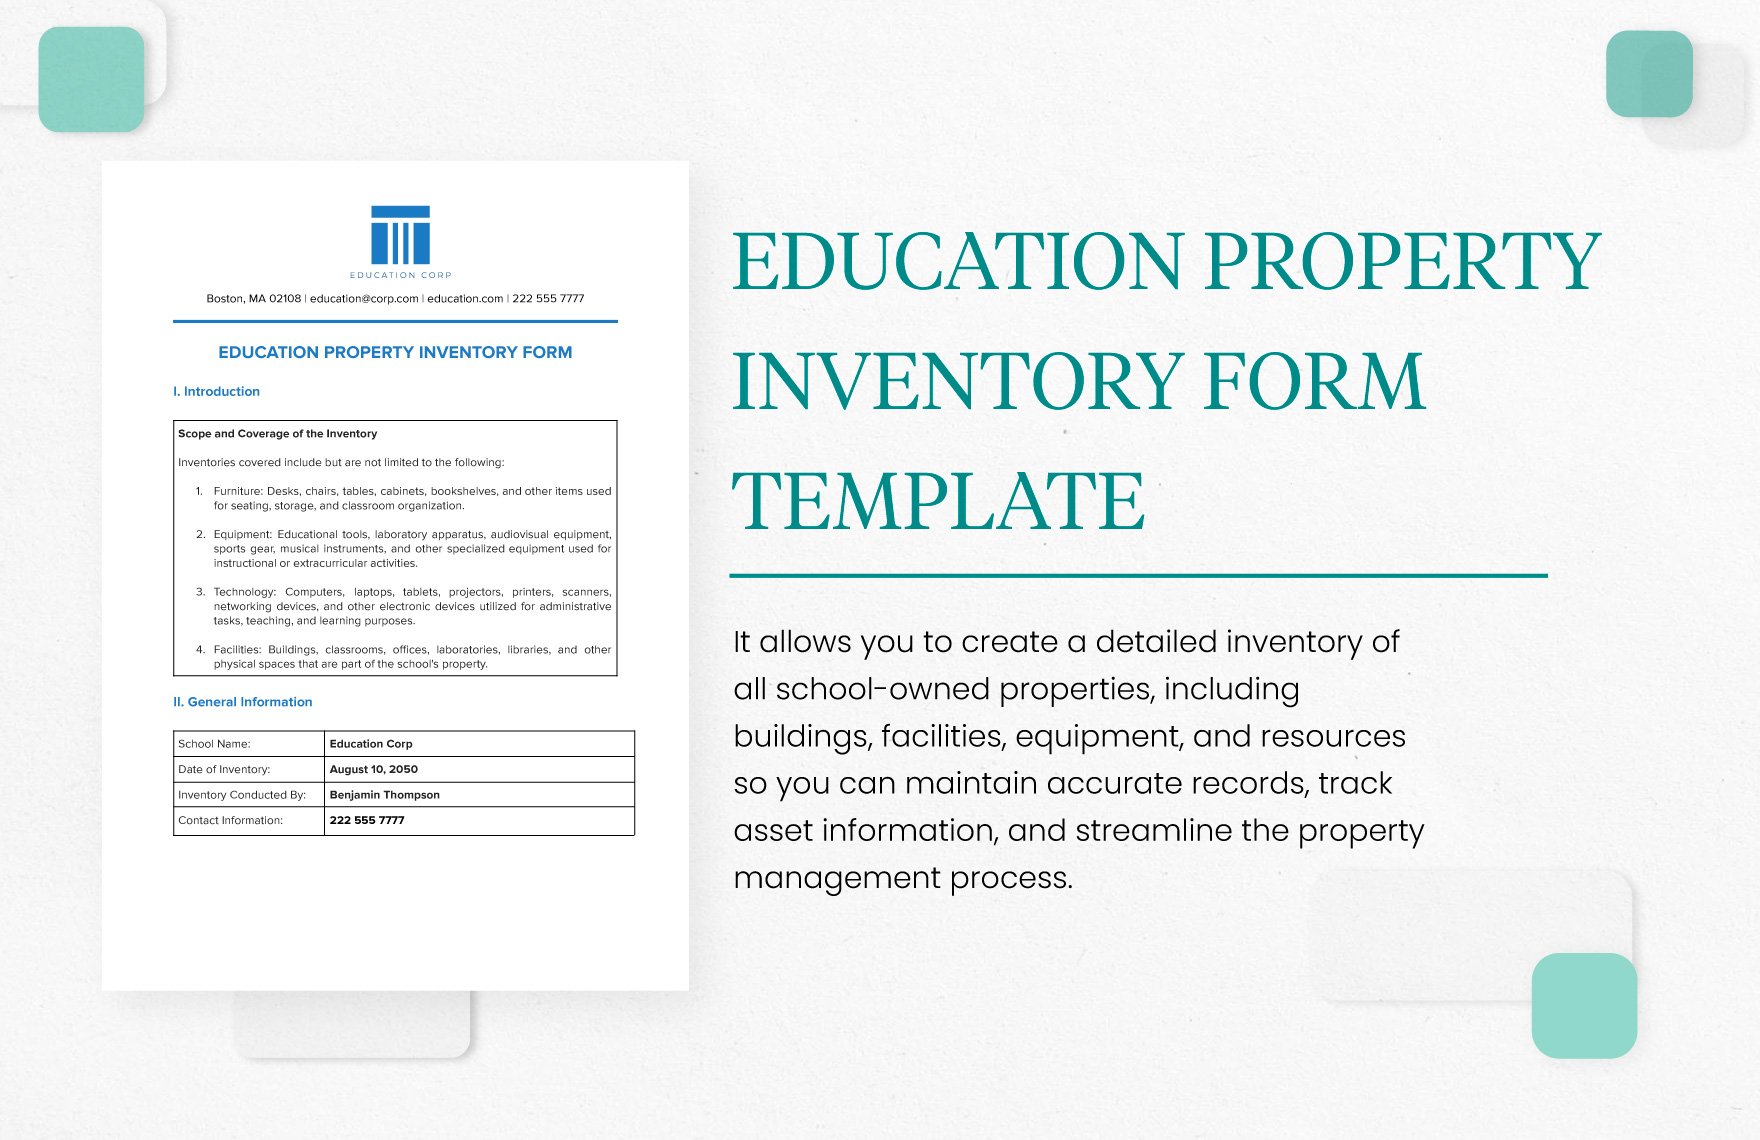 Education Property Inventory Form Template in Word, Google Docs, PDF